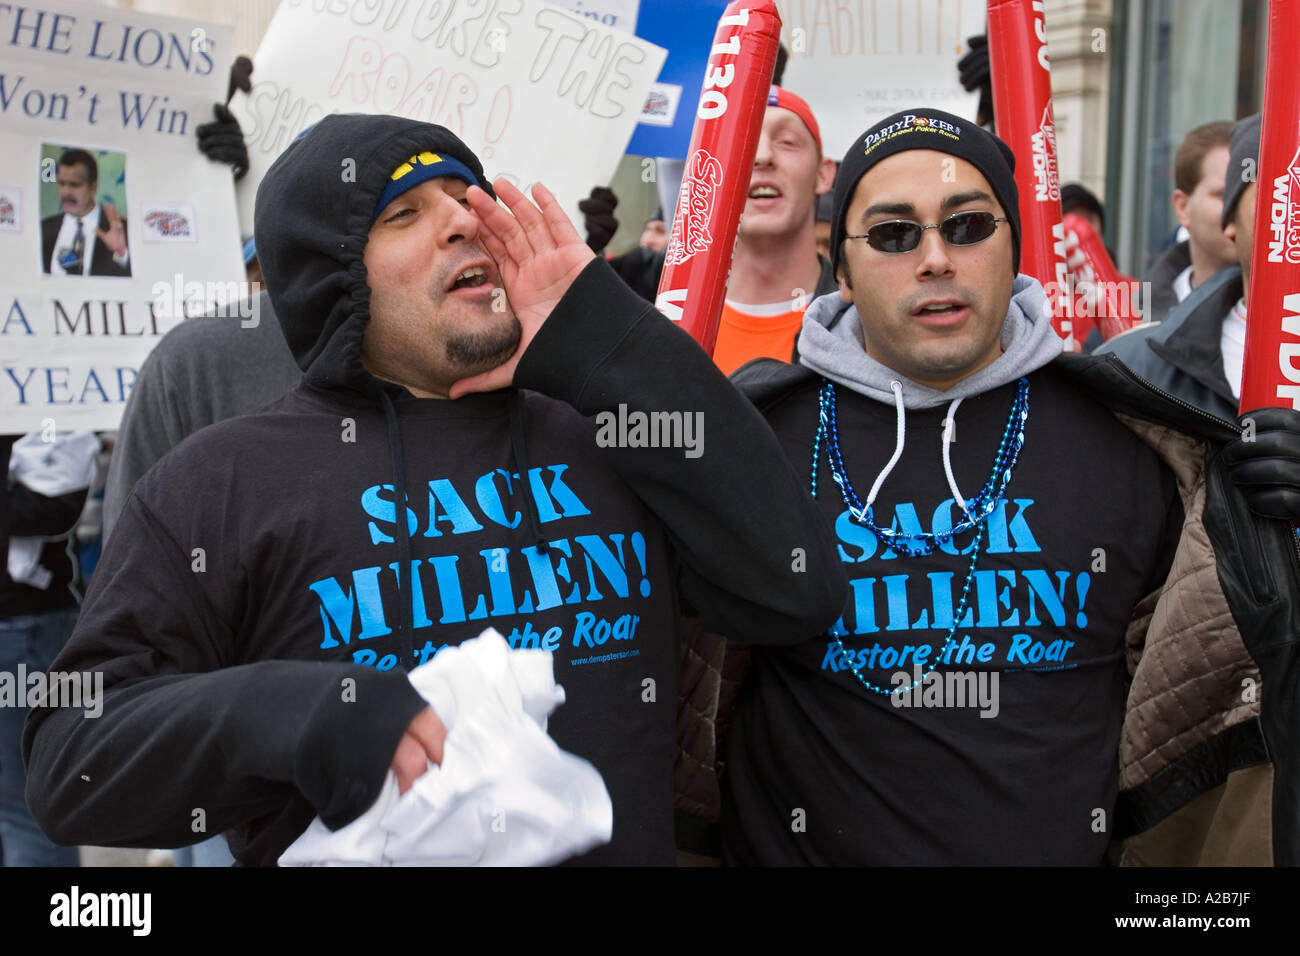 Fans Protest Detroit Lions Losing Record Stock Photo